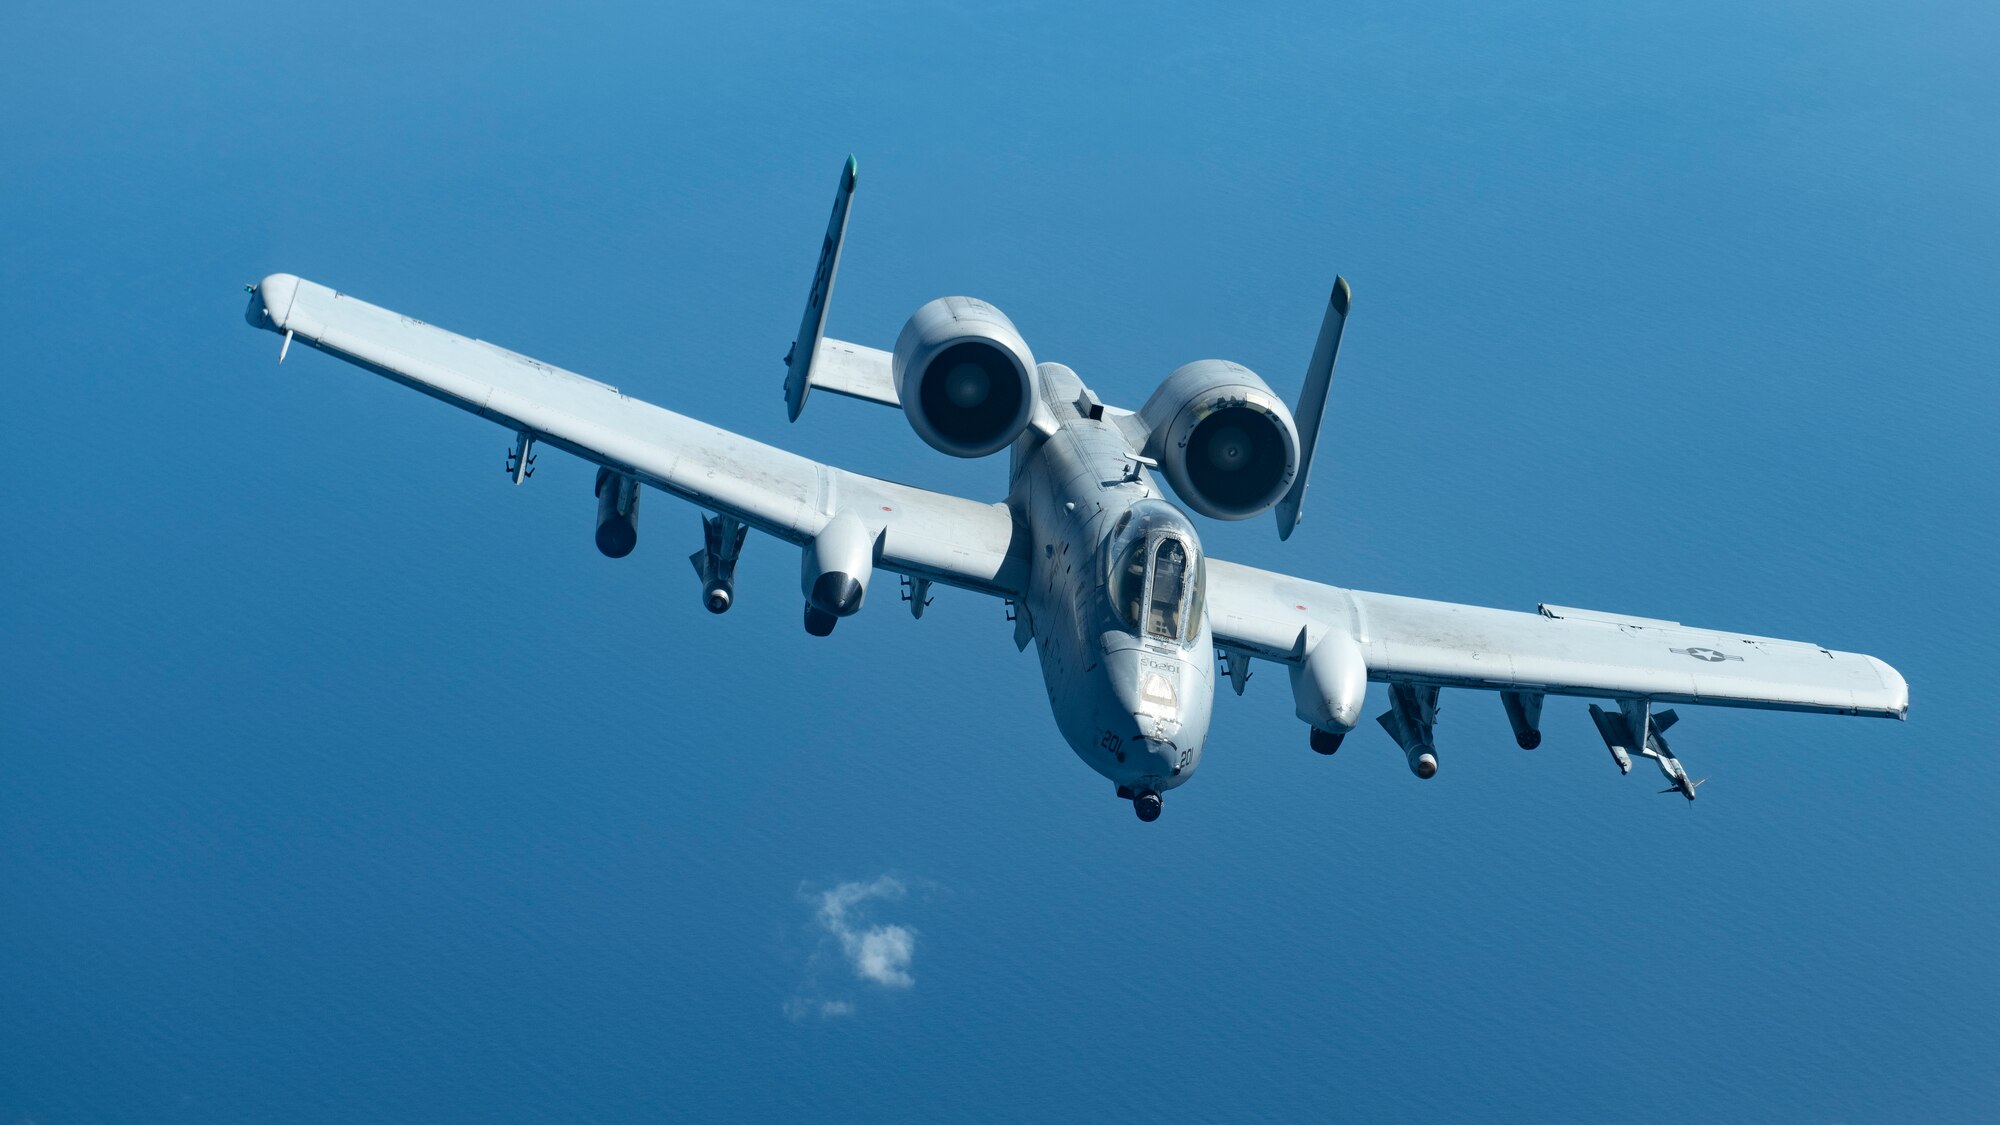 A U.S. Air Force A-10 Thunderbolt II assigned to the 51st Fighter Wing departs after receiving fuel over the Pacific Ocean Oct. 14, 2021. The 51st FW conducts routine training exercises to maintain the readiness needed to ensure the continued defense of Osan Air Base and the Republic of Korea. (U.S. Air Force photo by Senior Airman Jessi Monte)